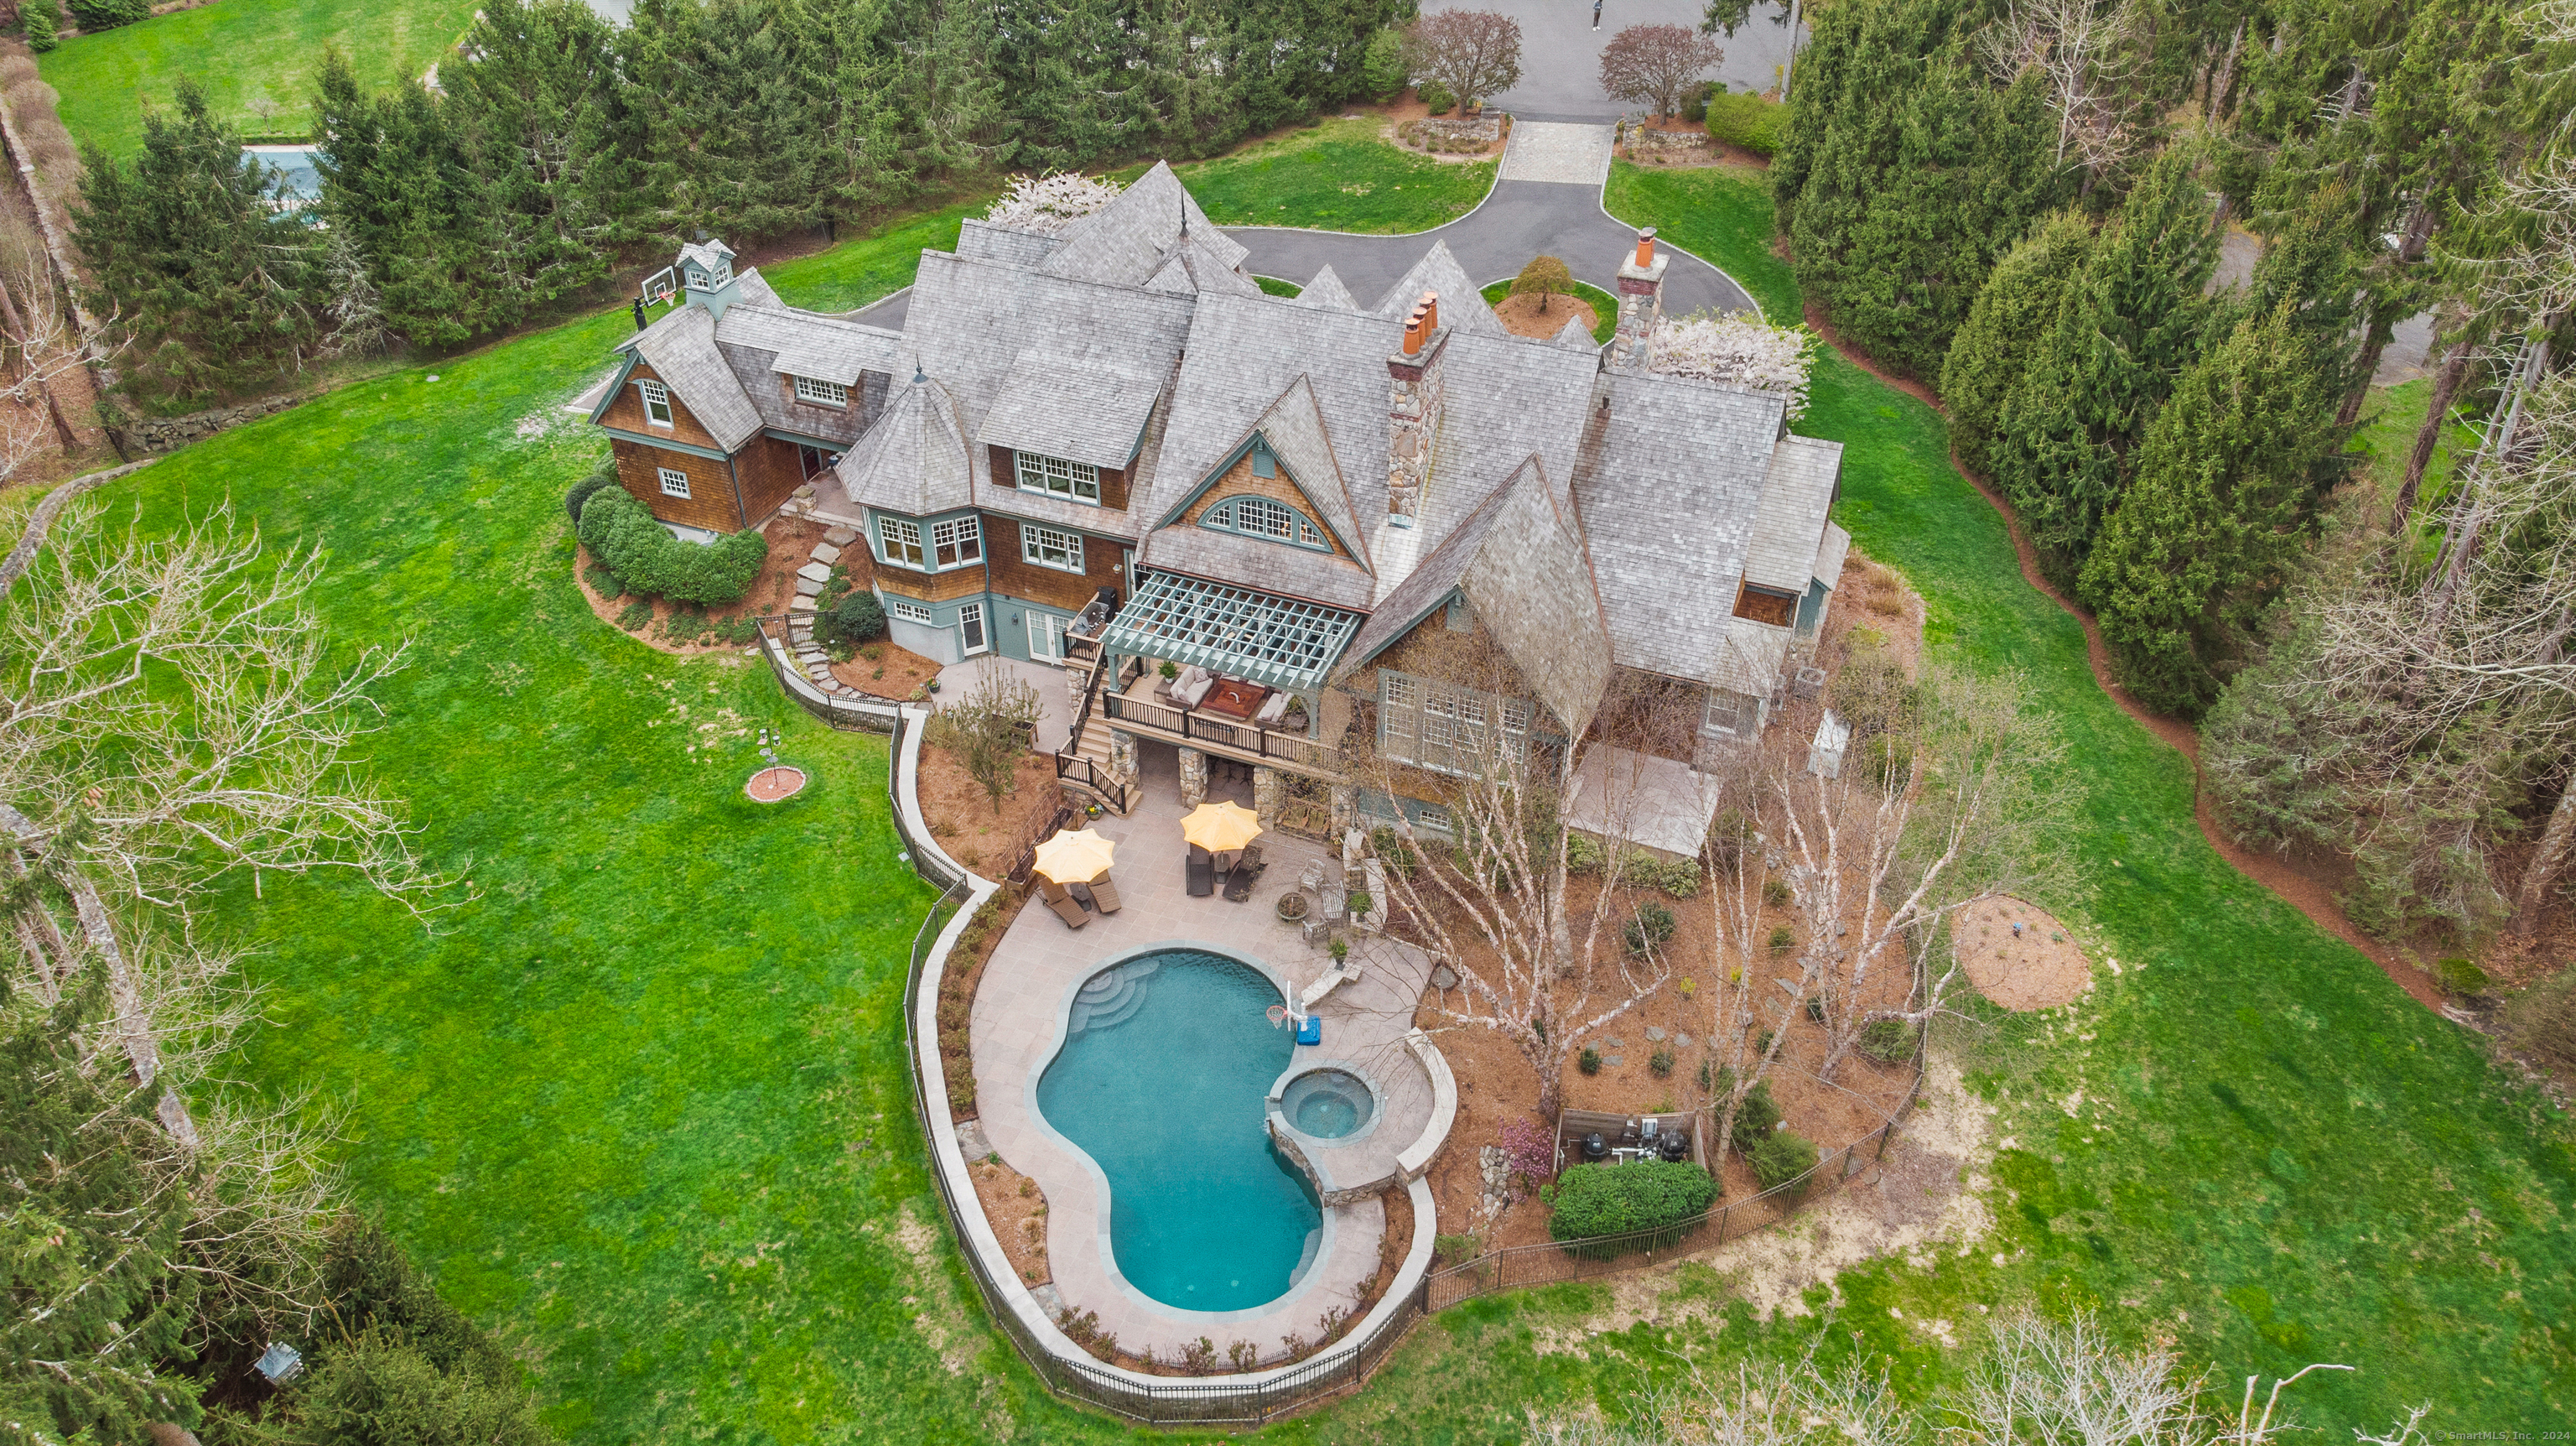 This Custom Built Adirondack Estate boasts over 10,000 incredible square feet of living space, perfect for entertaining, working, playing and relaxation. This one-owner cedar shake masterpiece showcases exceptional workmanship crafted with the finest materials which is evident upon arriving at 6 Pan Handle Lane. The cobblestone entrance leads to a circular drive welcoming you onto the beautiful 2.51 acre property. Enter the two-story foyer and take in all of the elegance. You will be captivated by the seamless flow to the living room, dining room and the two-story open great room enhanced with a stone fireplace and French doors to the deck and pergola, bringing the outdoors in. The chef's kitchen offers high-end appliances including three ovens, an oversized island and opens to a breakfast room accented with a brushed nickel ceiling. The regal first-floor office is a must-see, adjacent to the exquisite Primary Bedroom Suite with a fireplace, oversized walk-in closet, luxurious bath with radiant heated marble and onyx floors and an outdoor patio, allowing you to enjoy the beauty of your private yard.